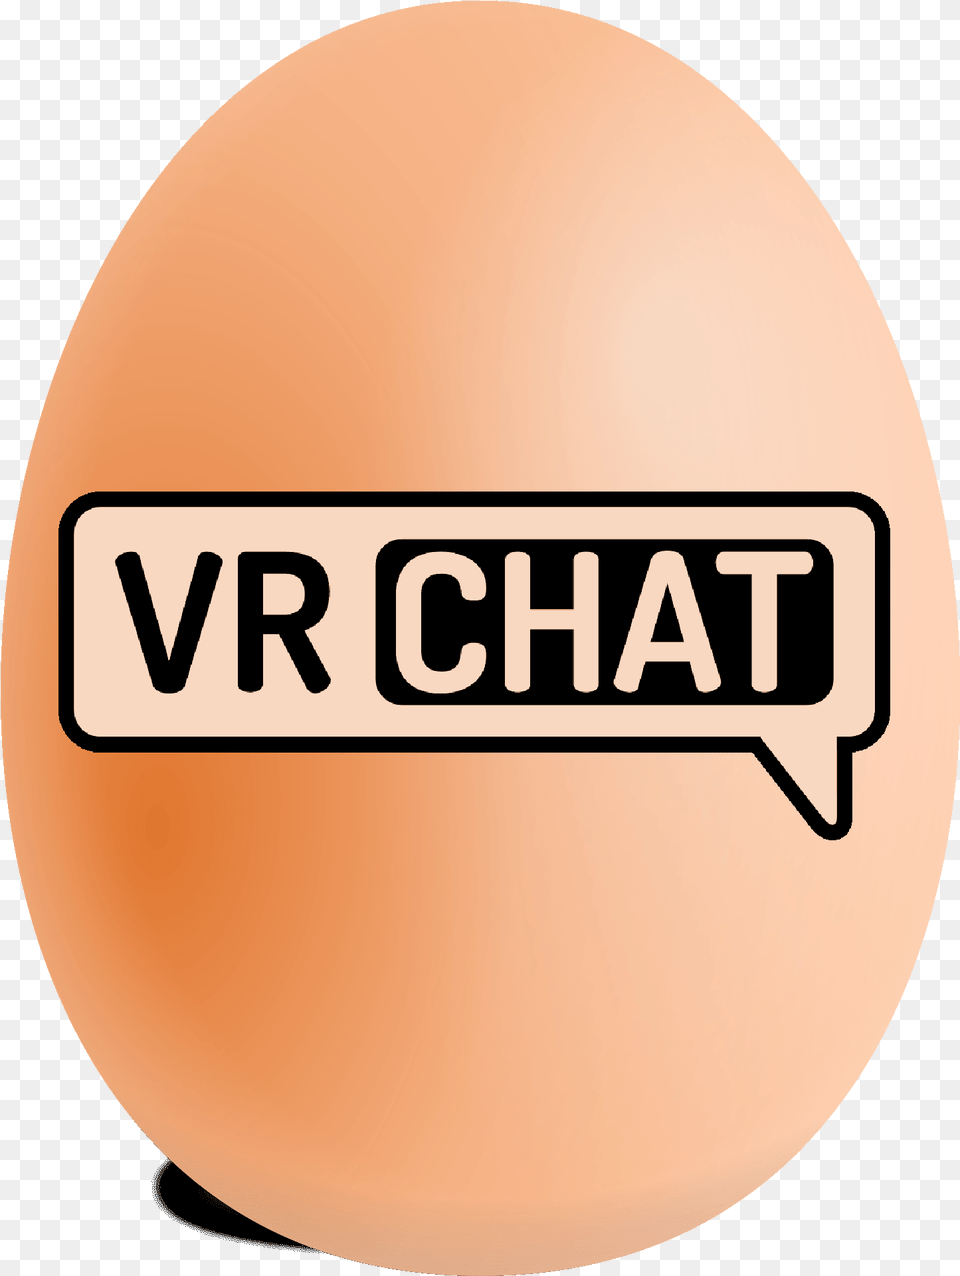 Vrchat Merchandise Just Announced Circle, Logo, Astronomy, Moon, Nature Free Png Download